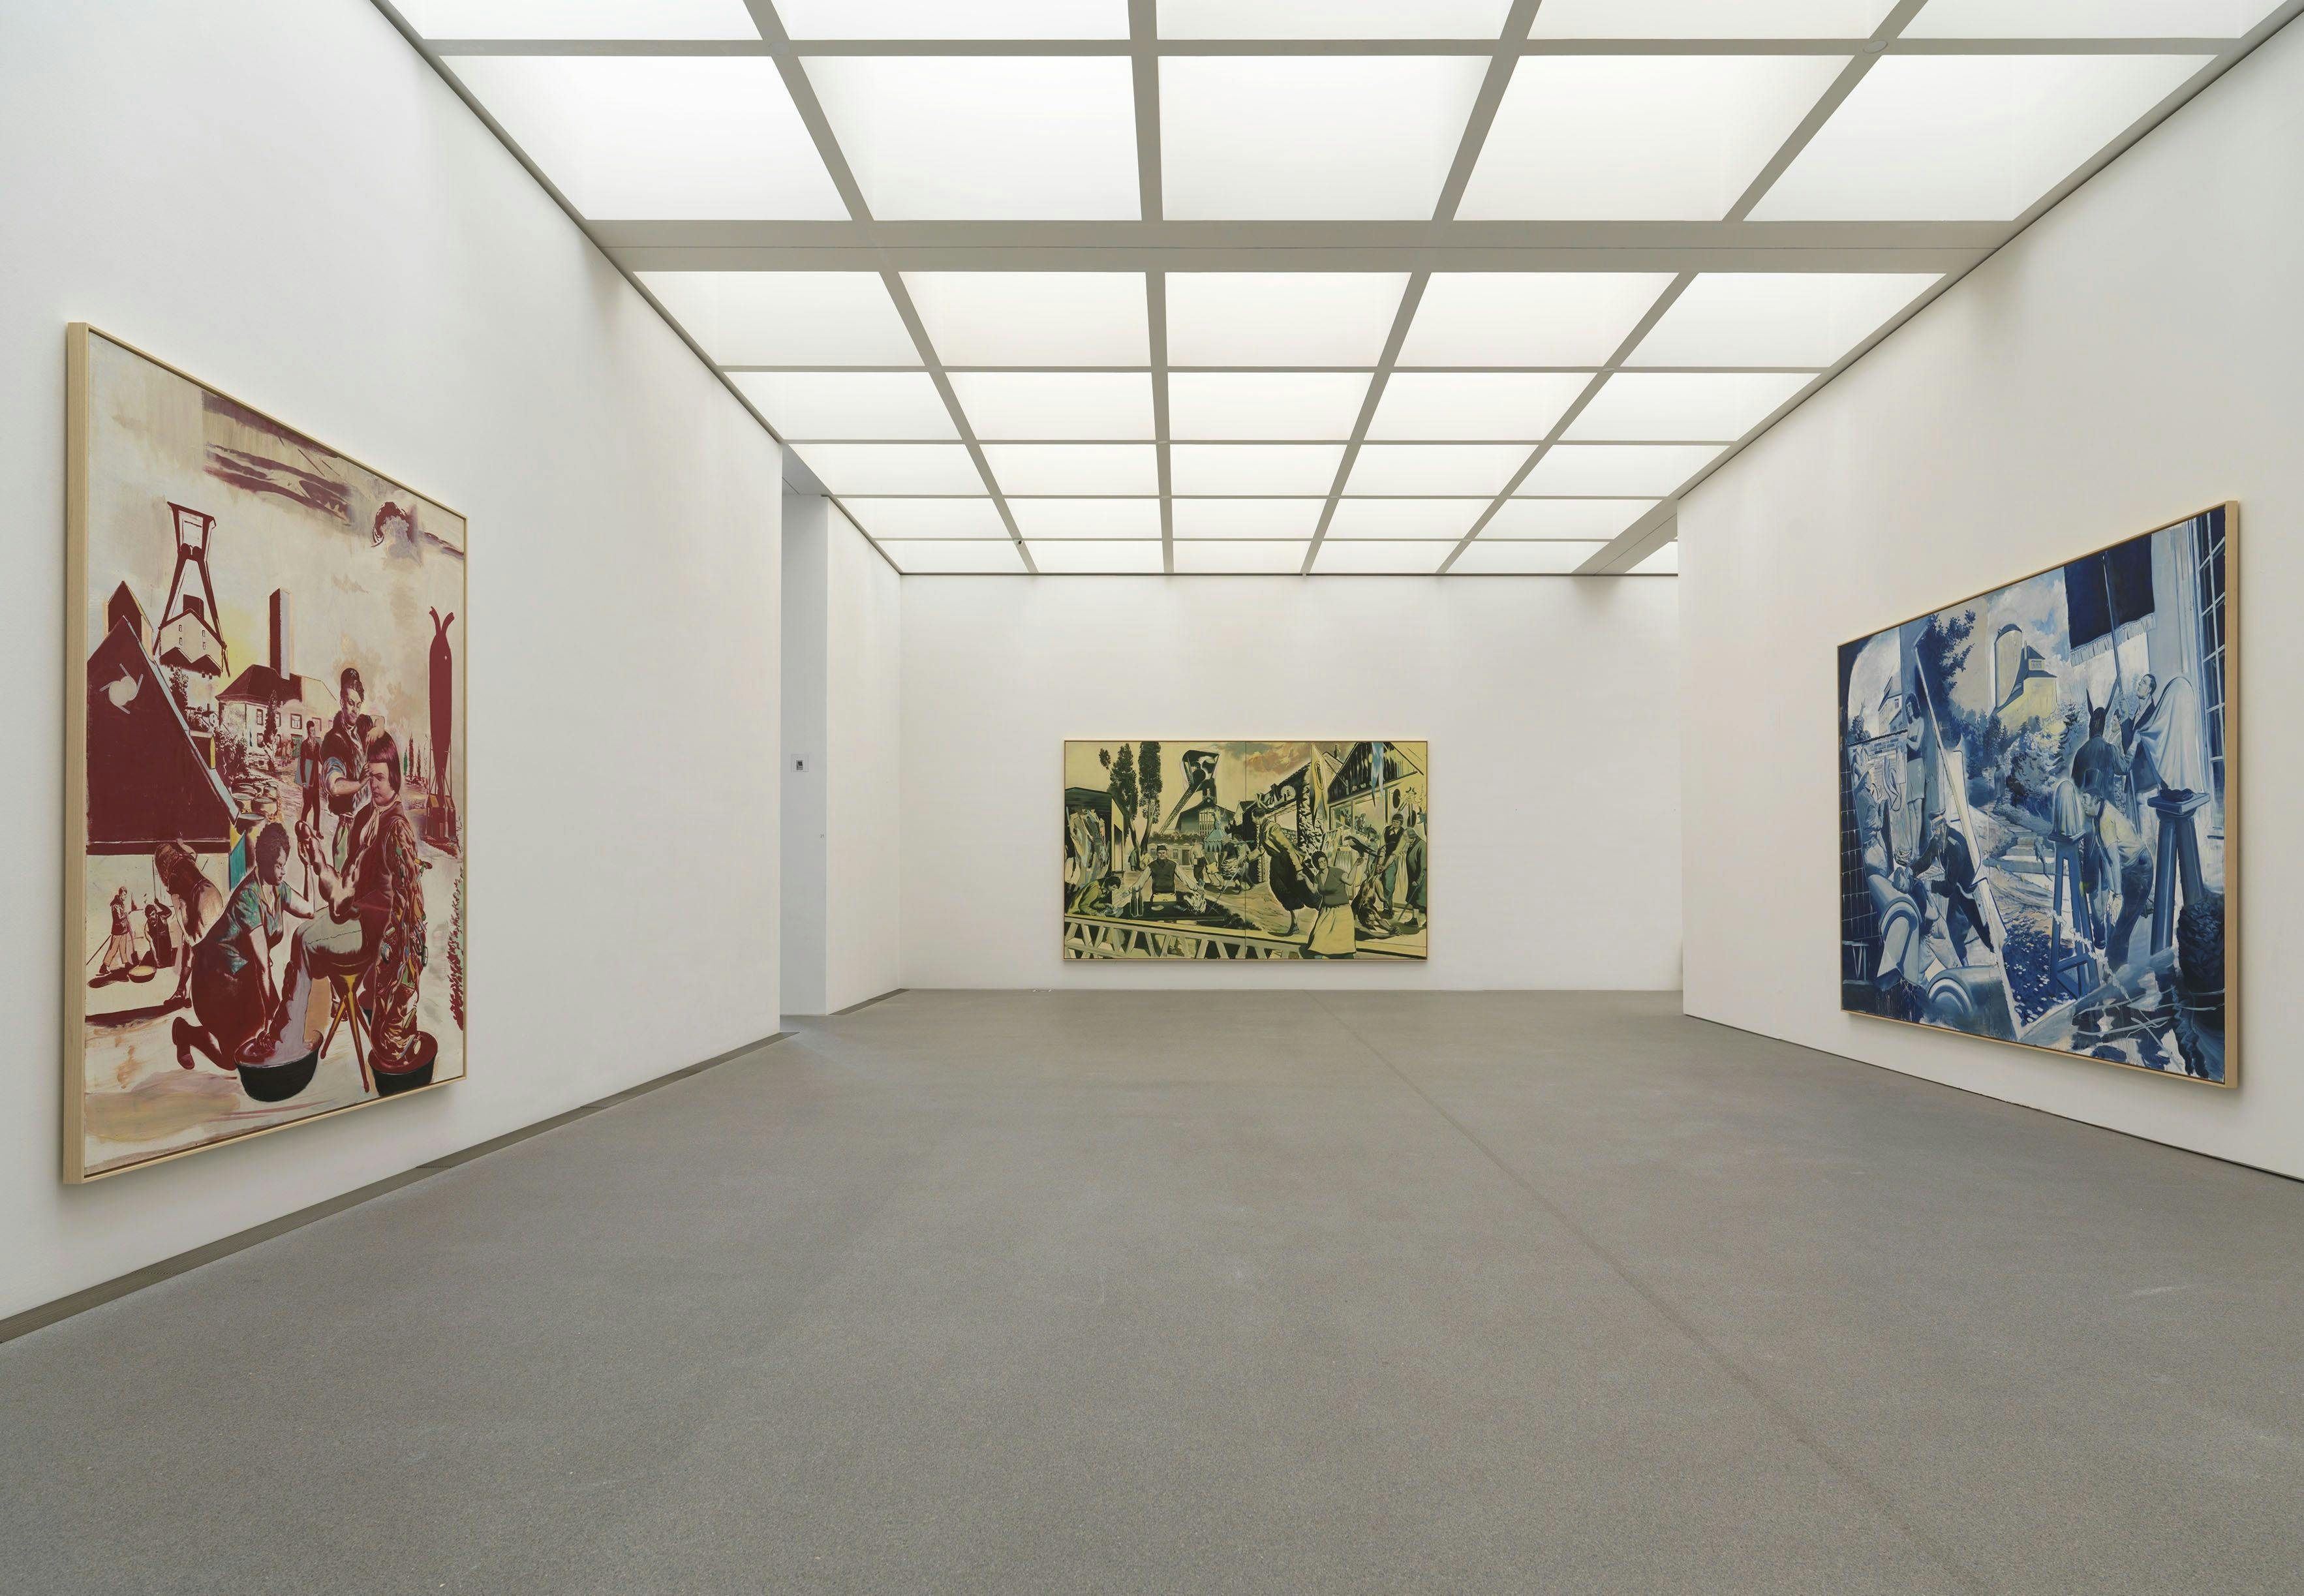 Installation view of the exhibition titled Neo Rauch at the Pinakothek der Moderne in Munich, dated 2010.